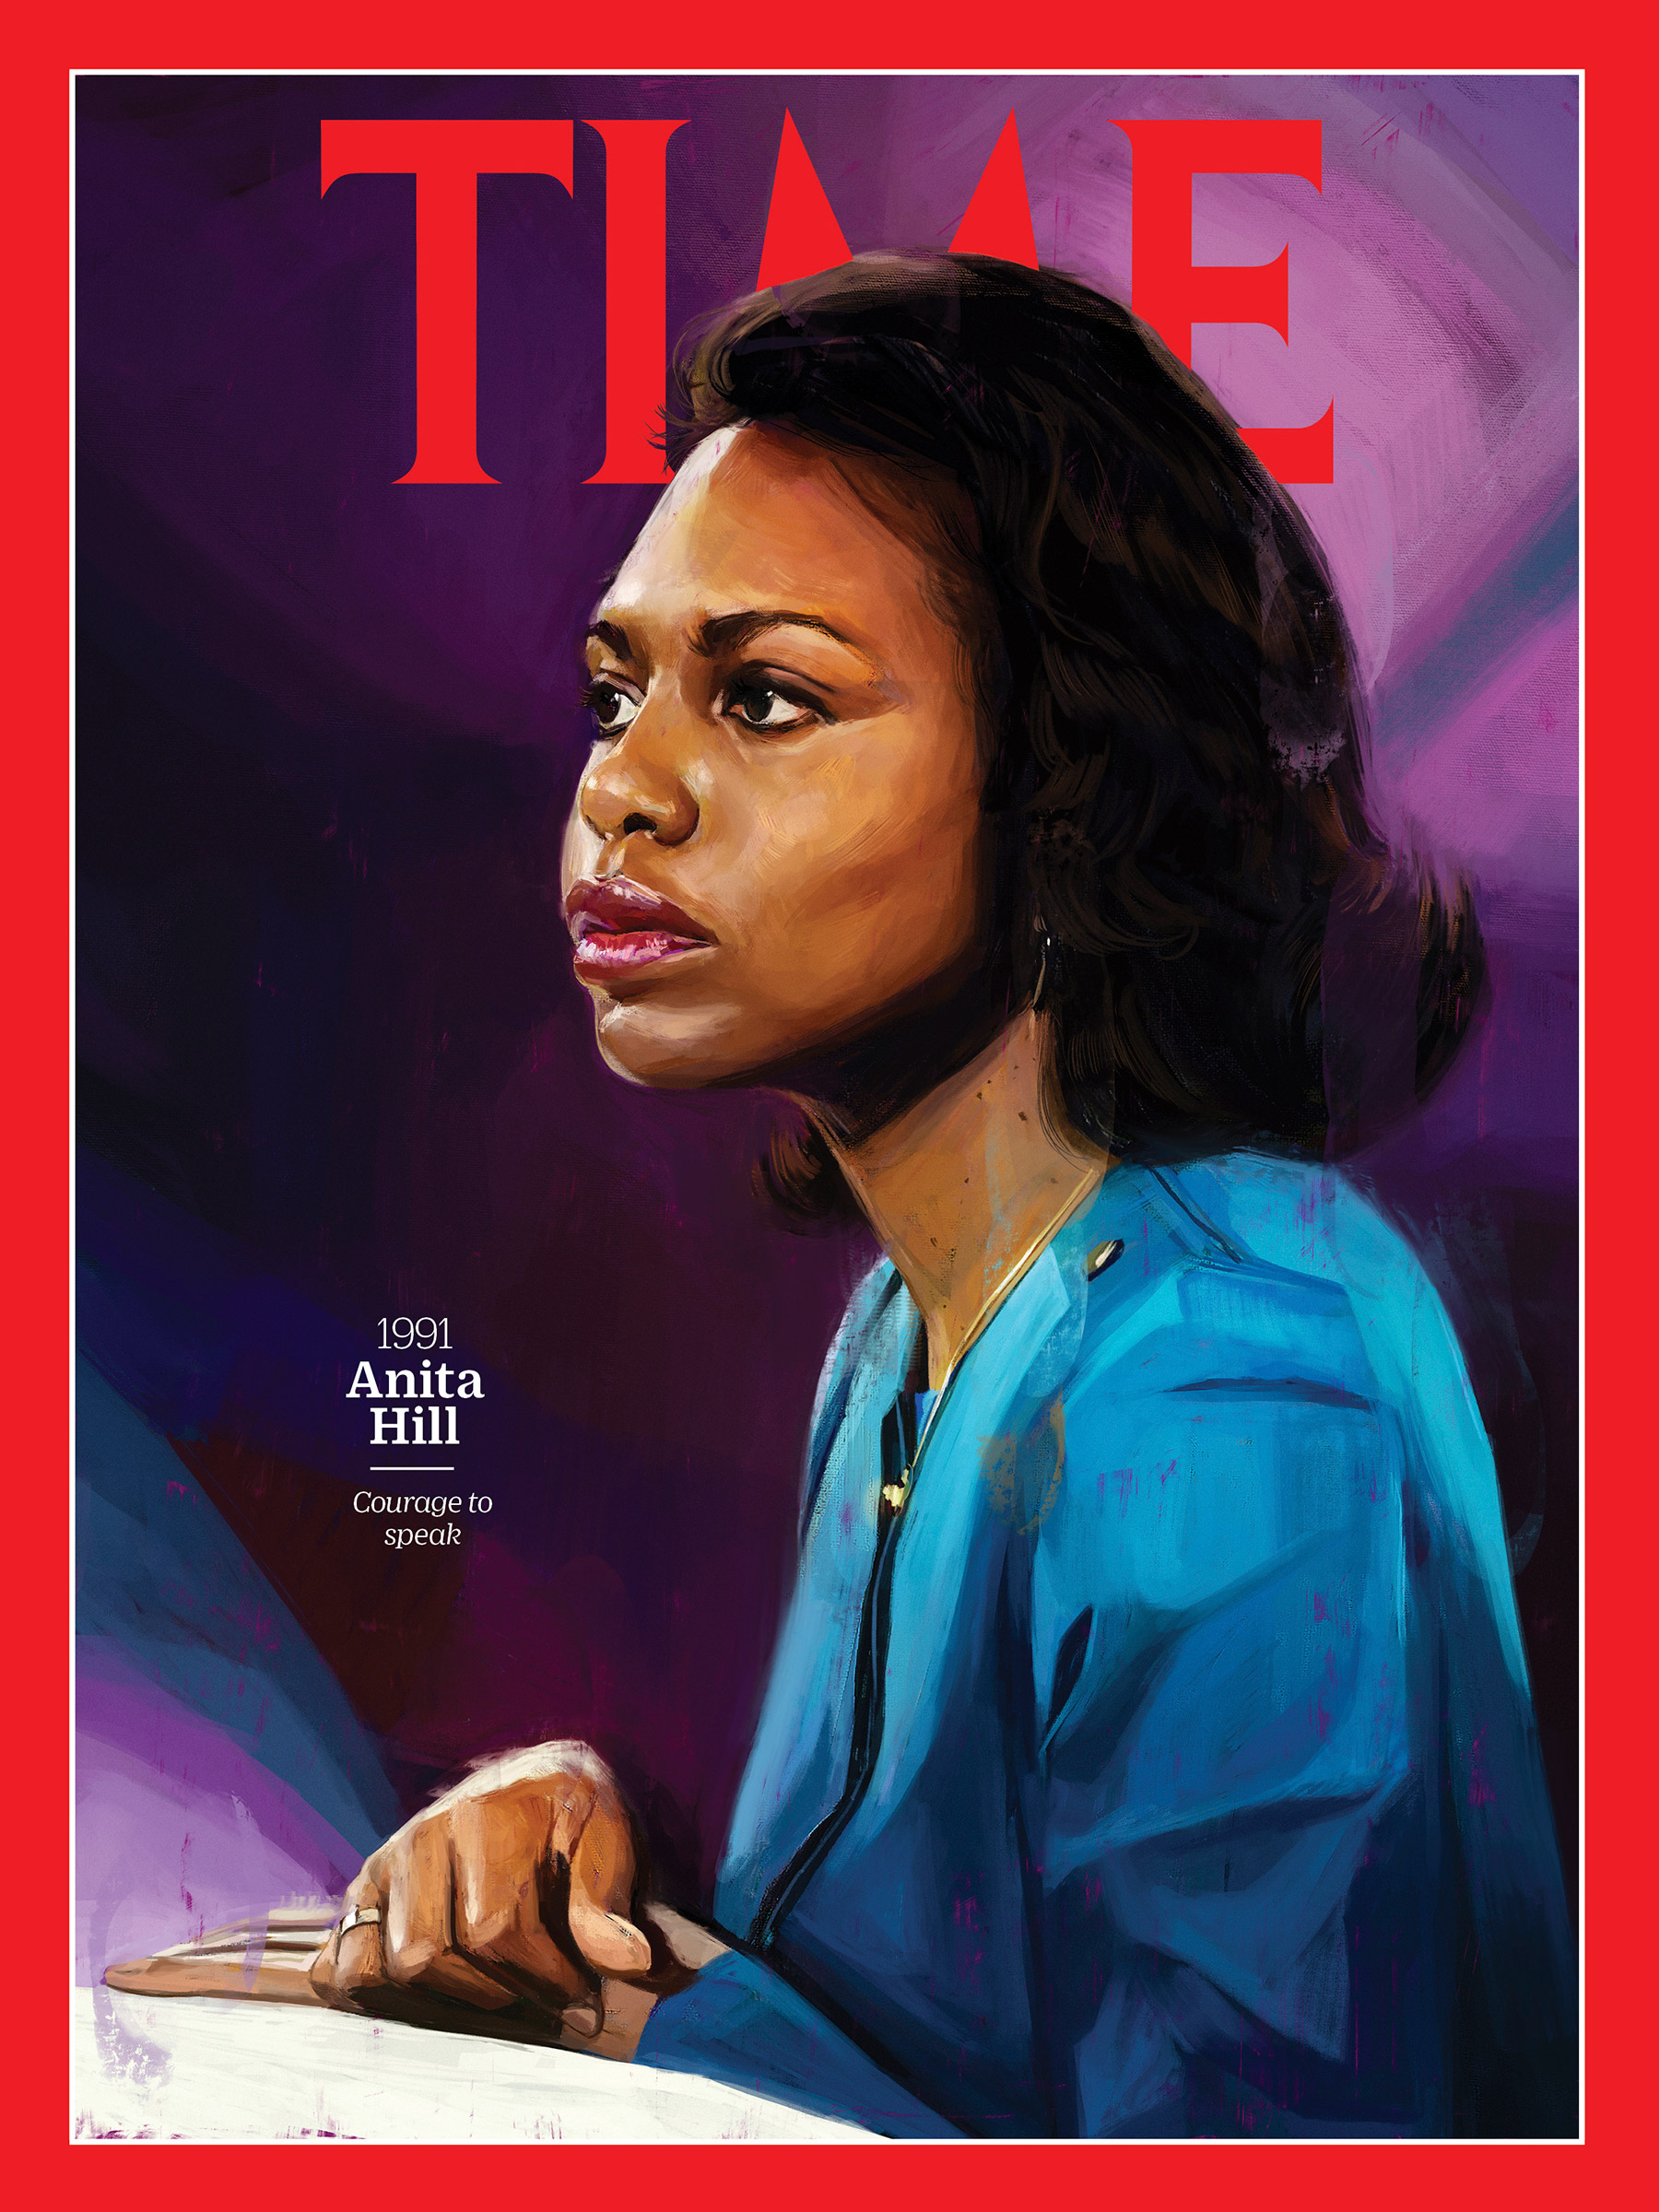 <a href="https://fineartamerica.com/featured/anita-hill-1991-time.html"><strong>Buy the cover art→</strong></a> (Art by Alexis Franklin; Mark Reinstein—Corbis/Getty)